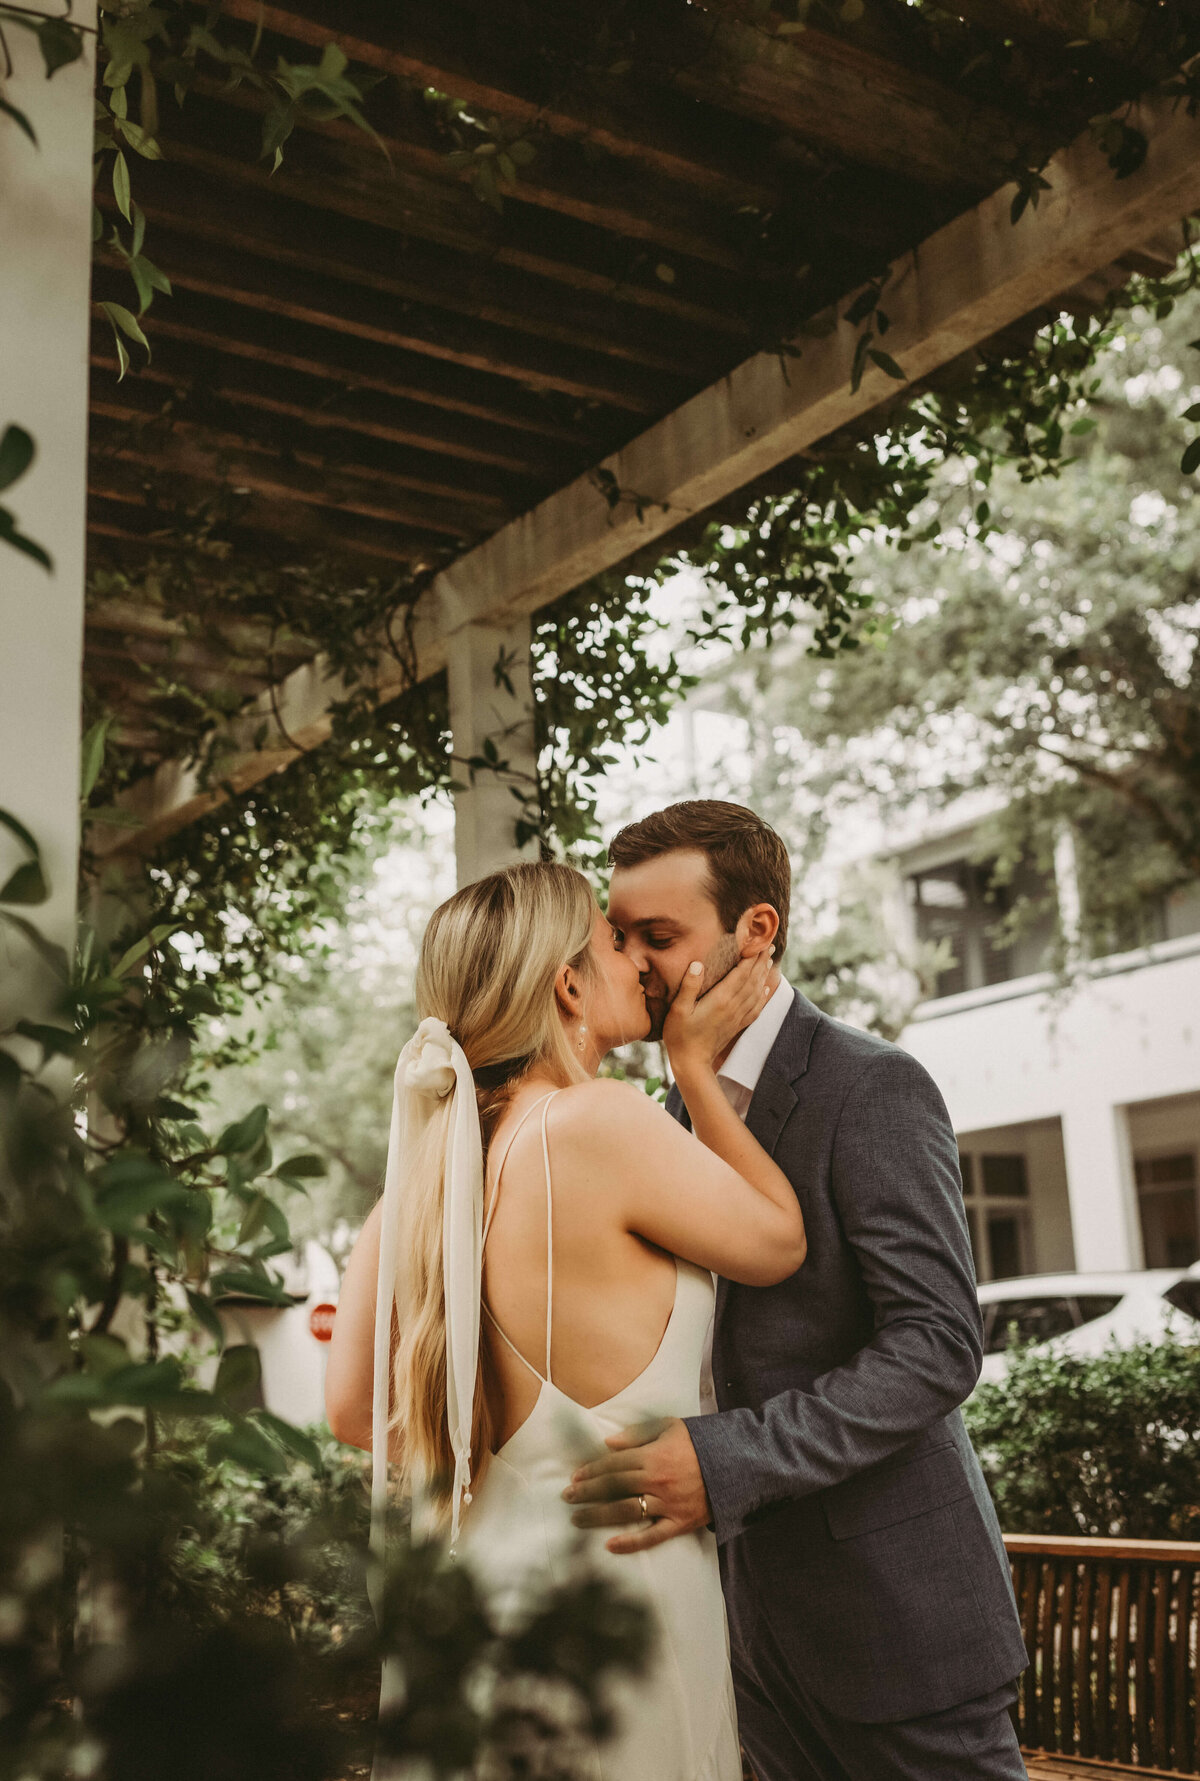 newlyweds kiss after intimate elopement wedding